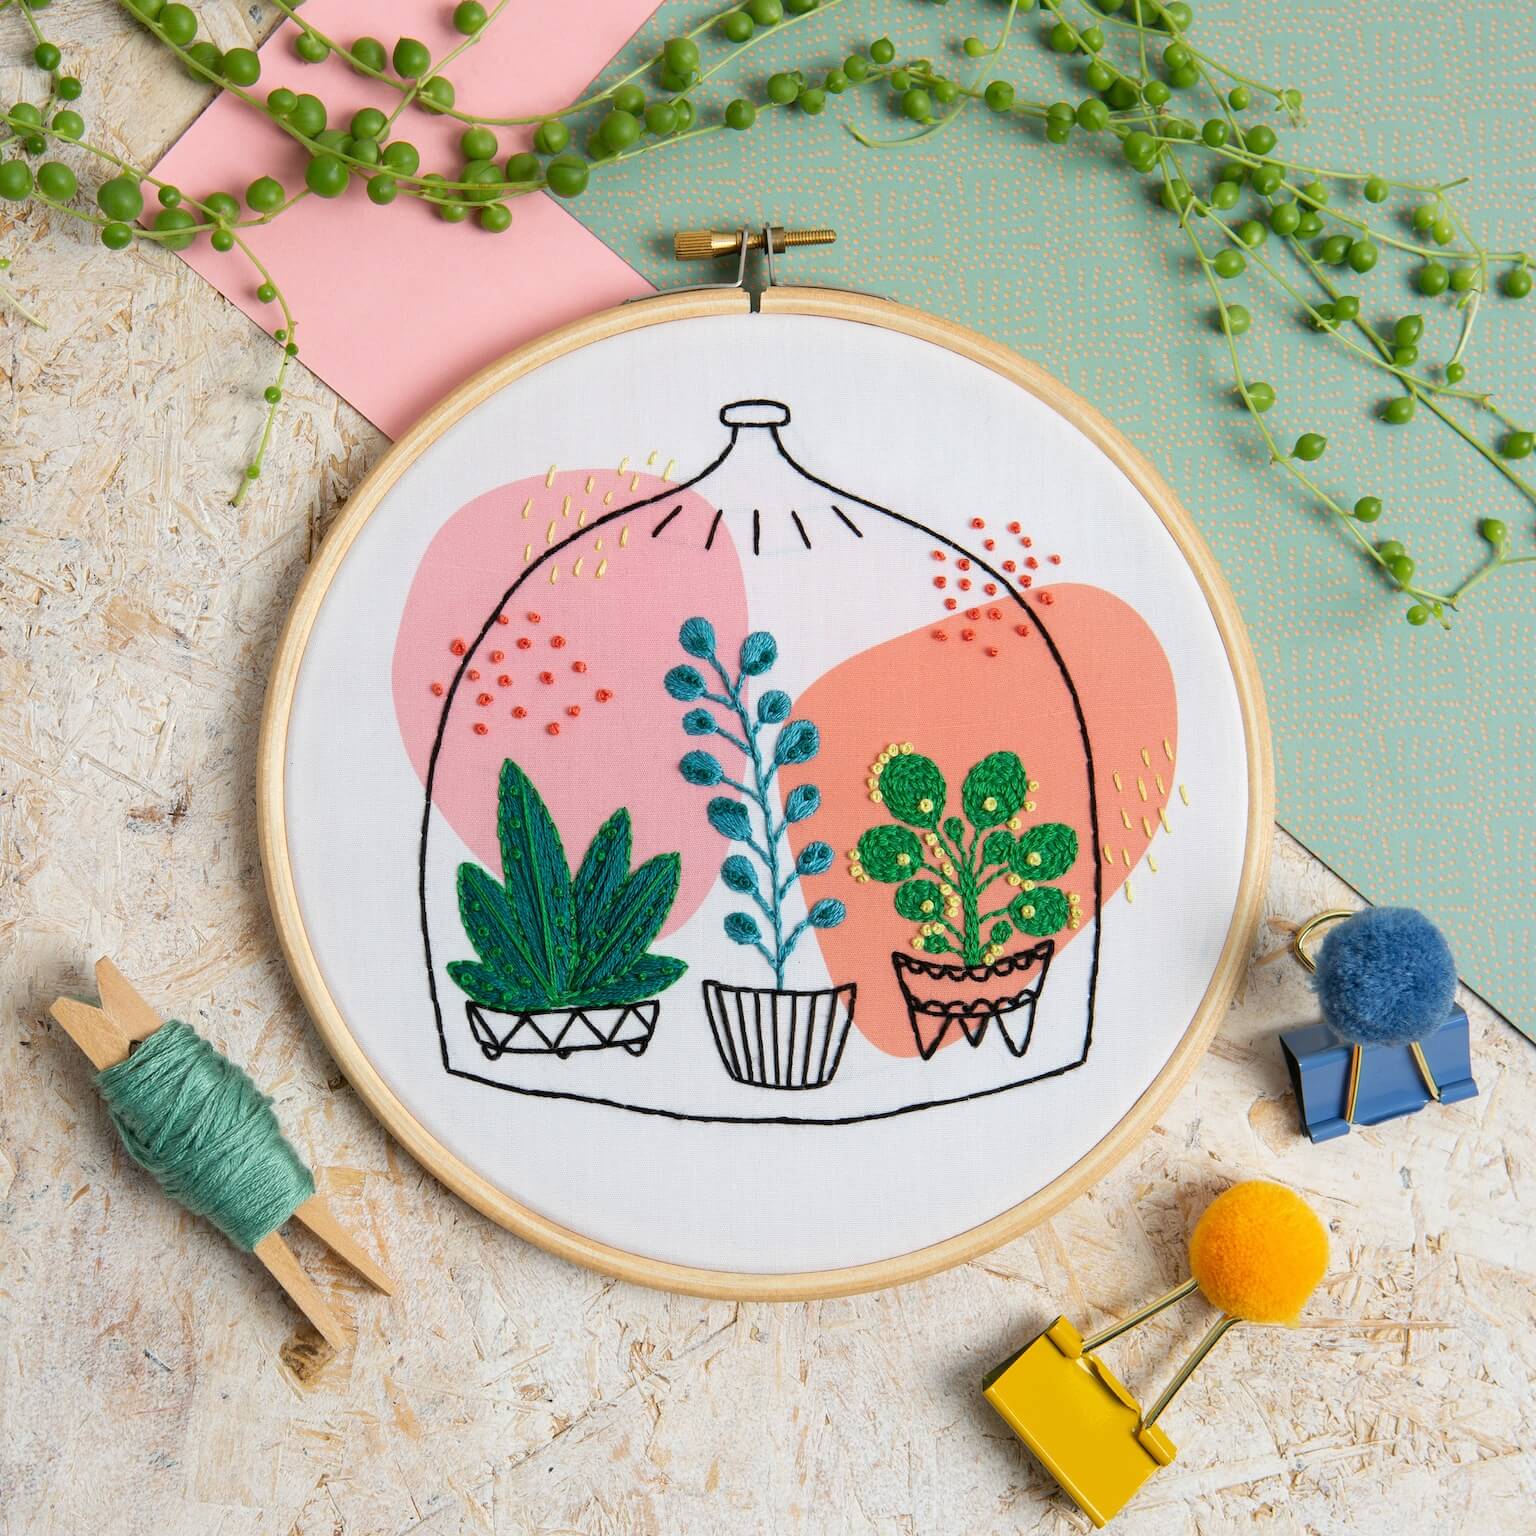 Houseplant embroidery pattern